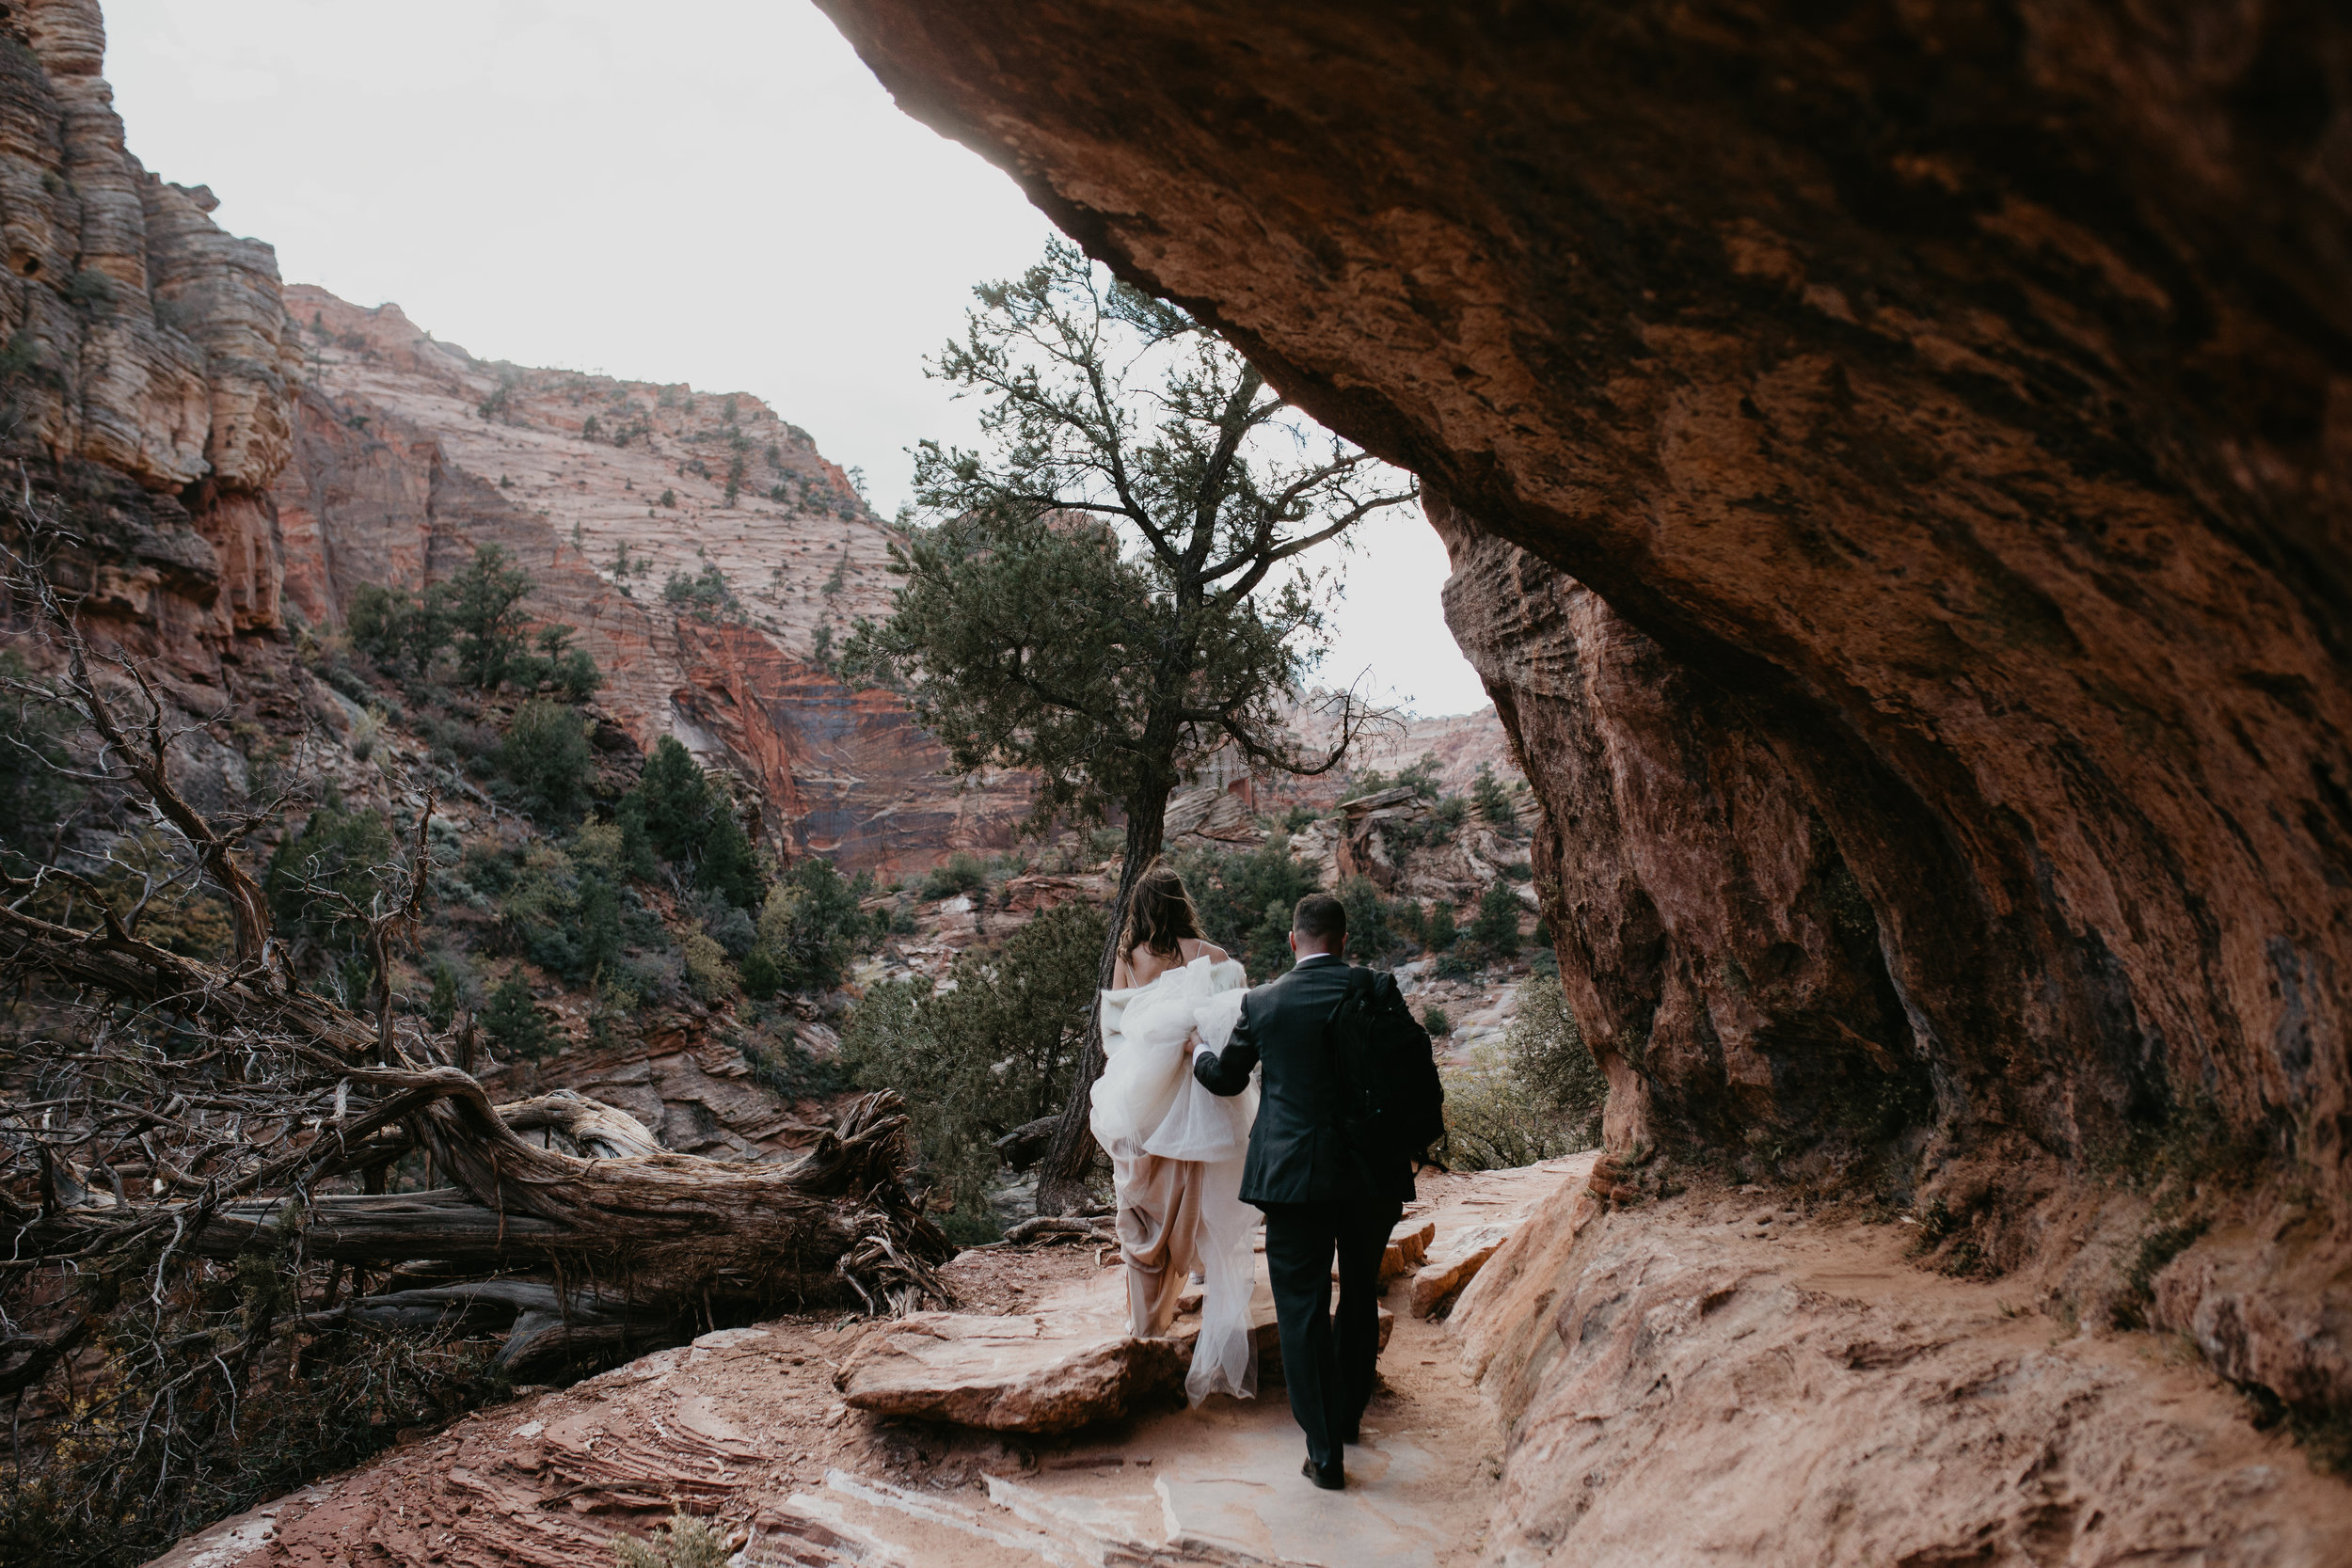 nicole-daacke-photography-zion-national-park-elopement-photographer-canyon-overlook-trail-elope-hiking-adventure-wedding-photos-fall-utah-red-rock-canyon-stgeorge-eloping-photographer-27.jpg